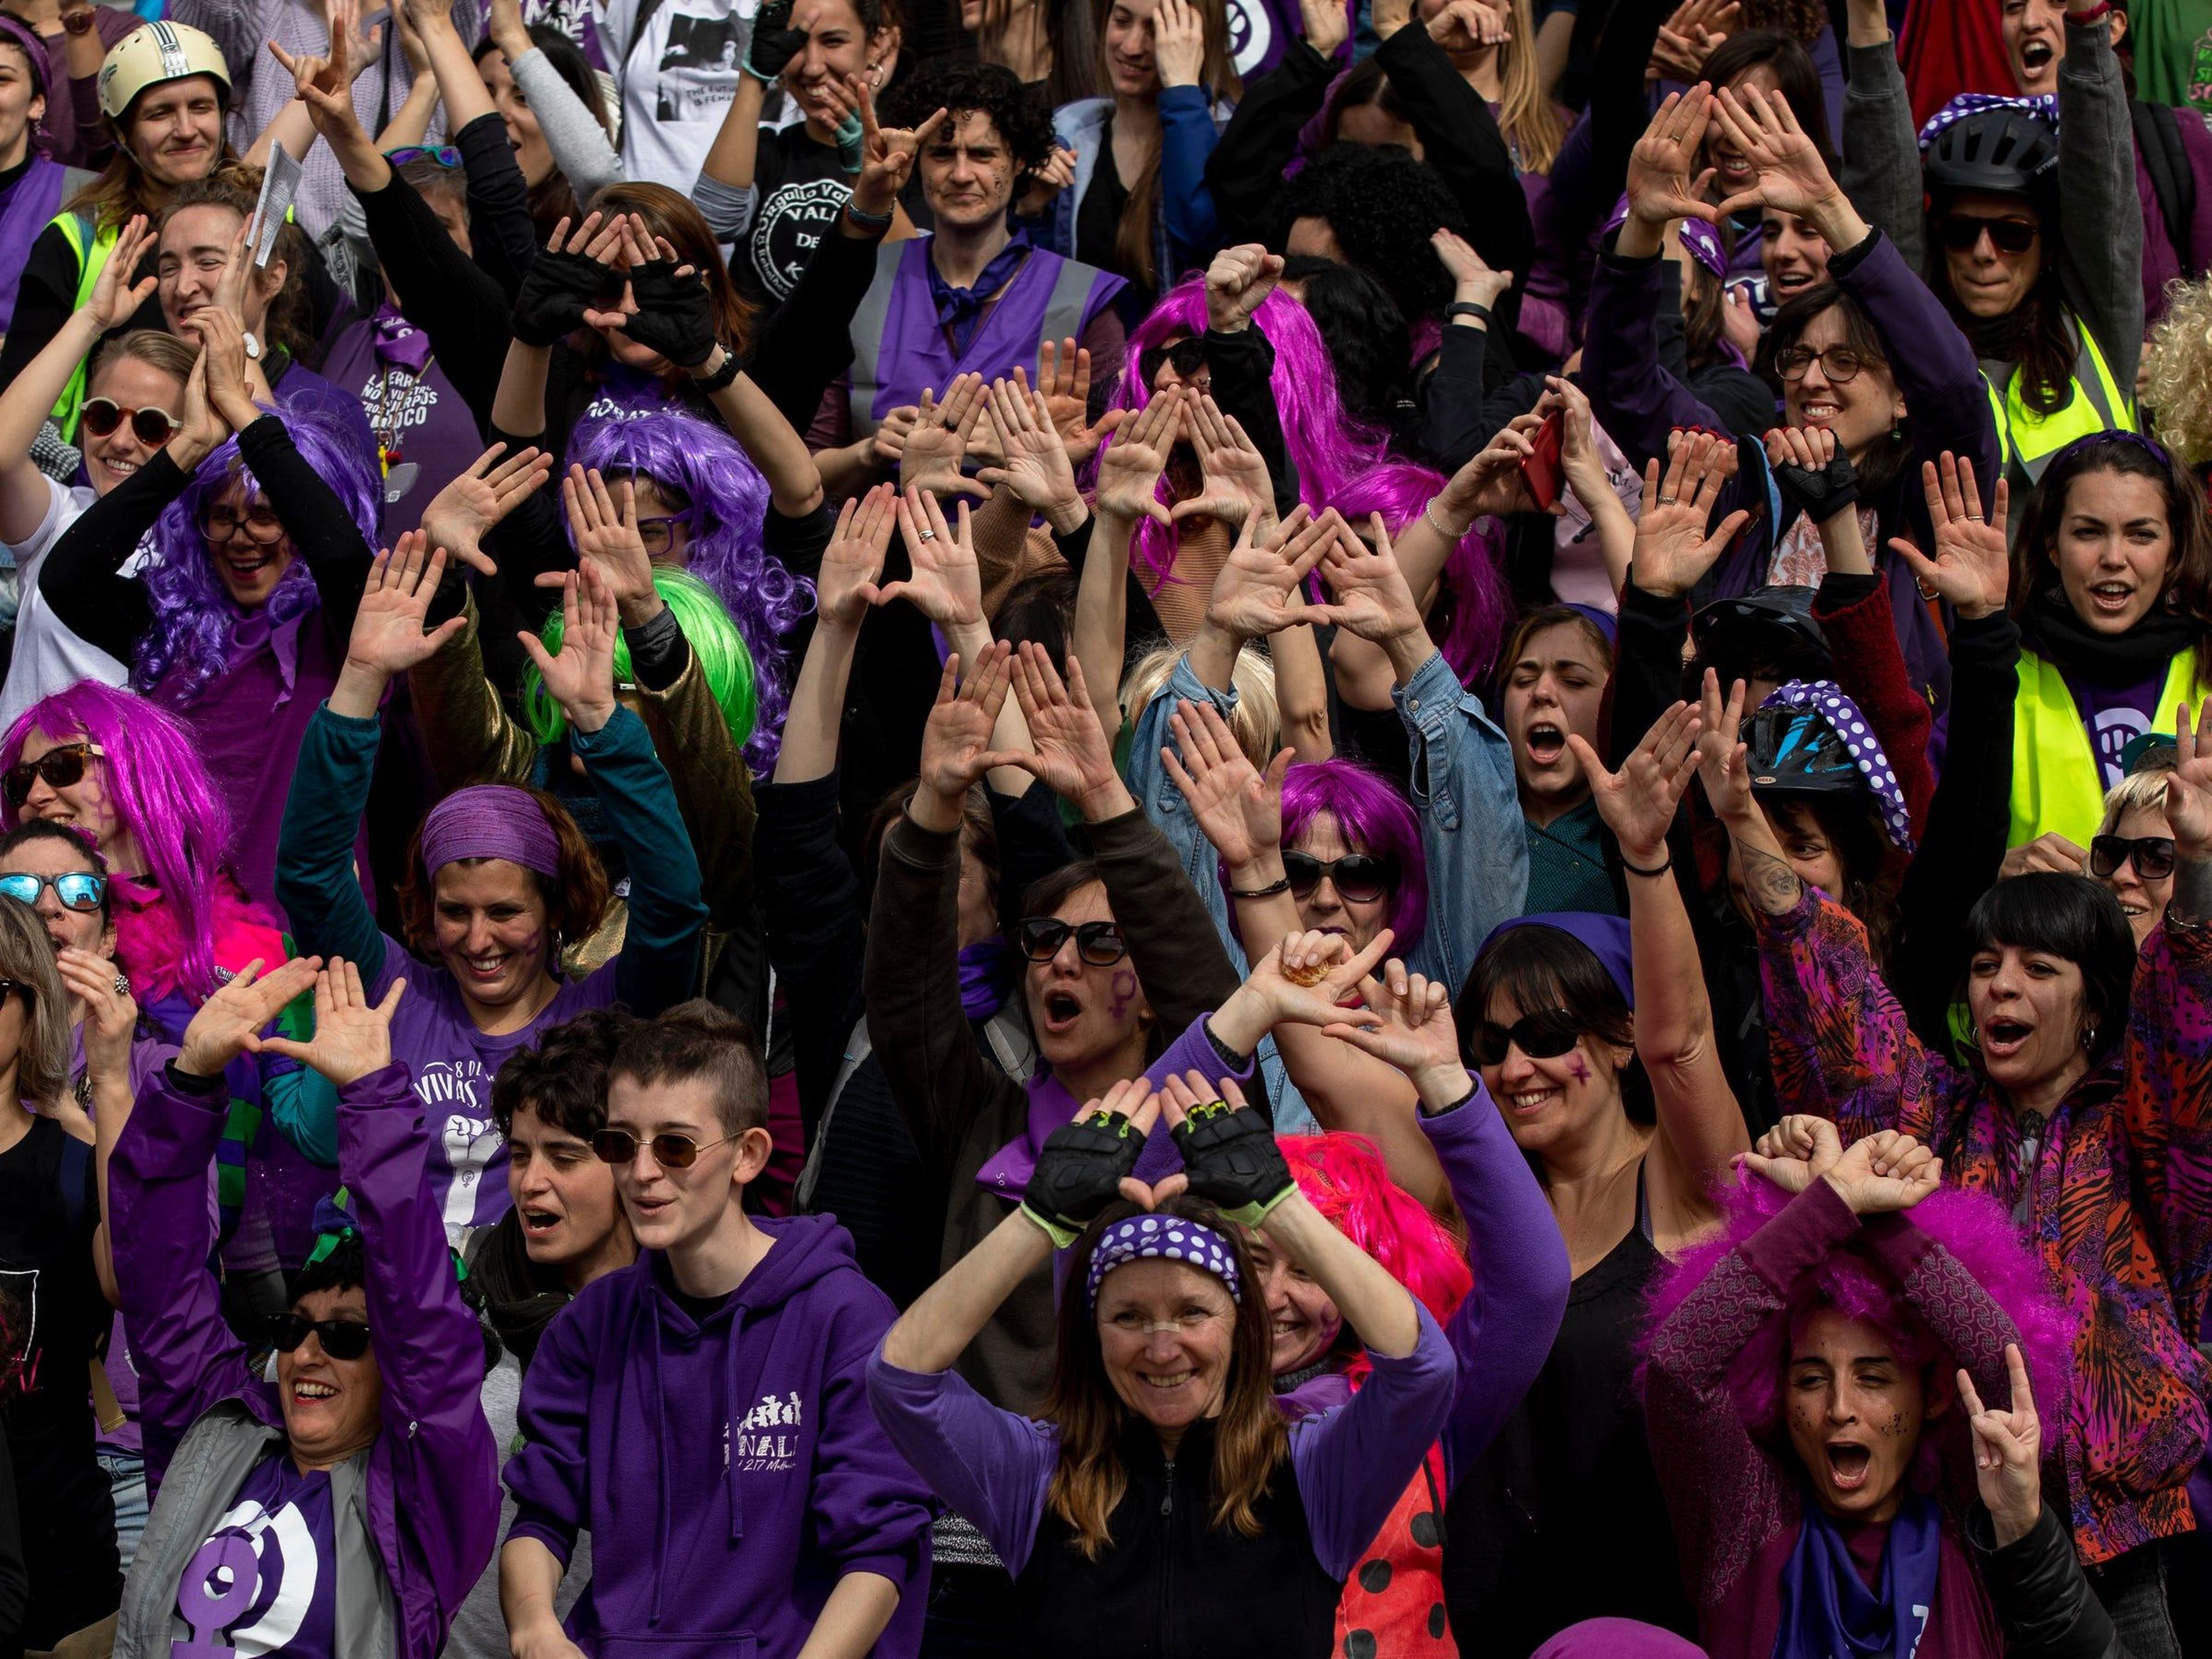 Groups of people display feminist hand symbols at a parade in Madrid, Spain.